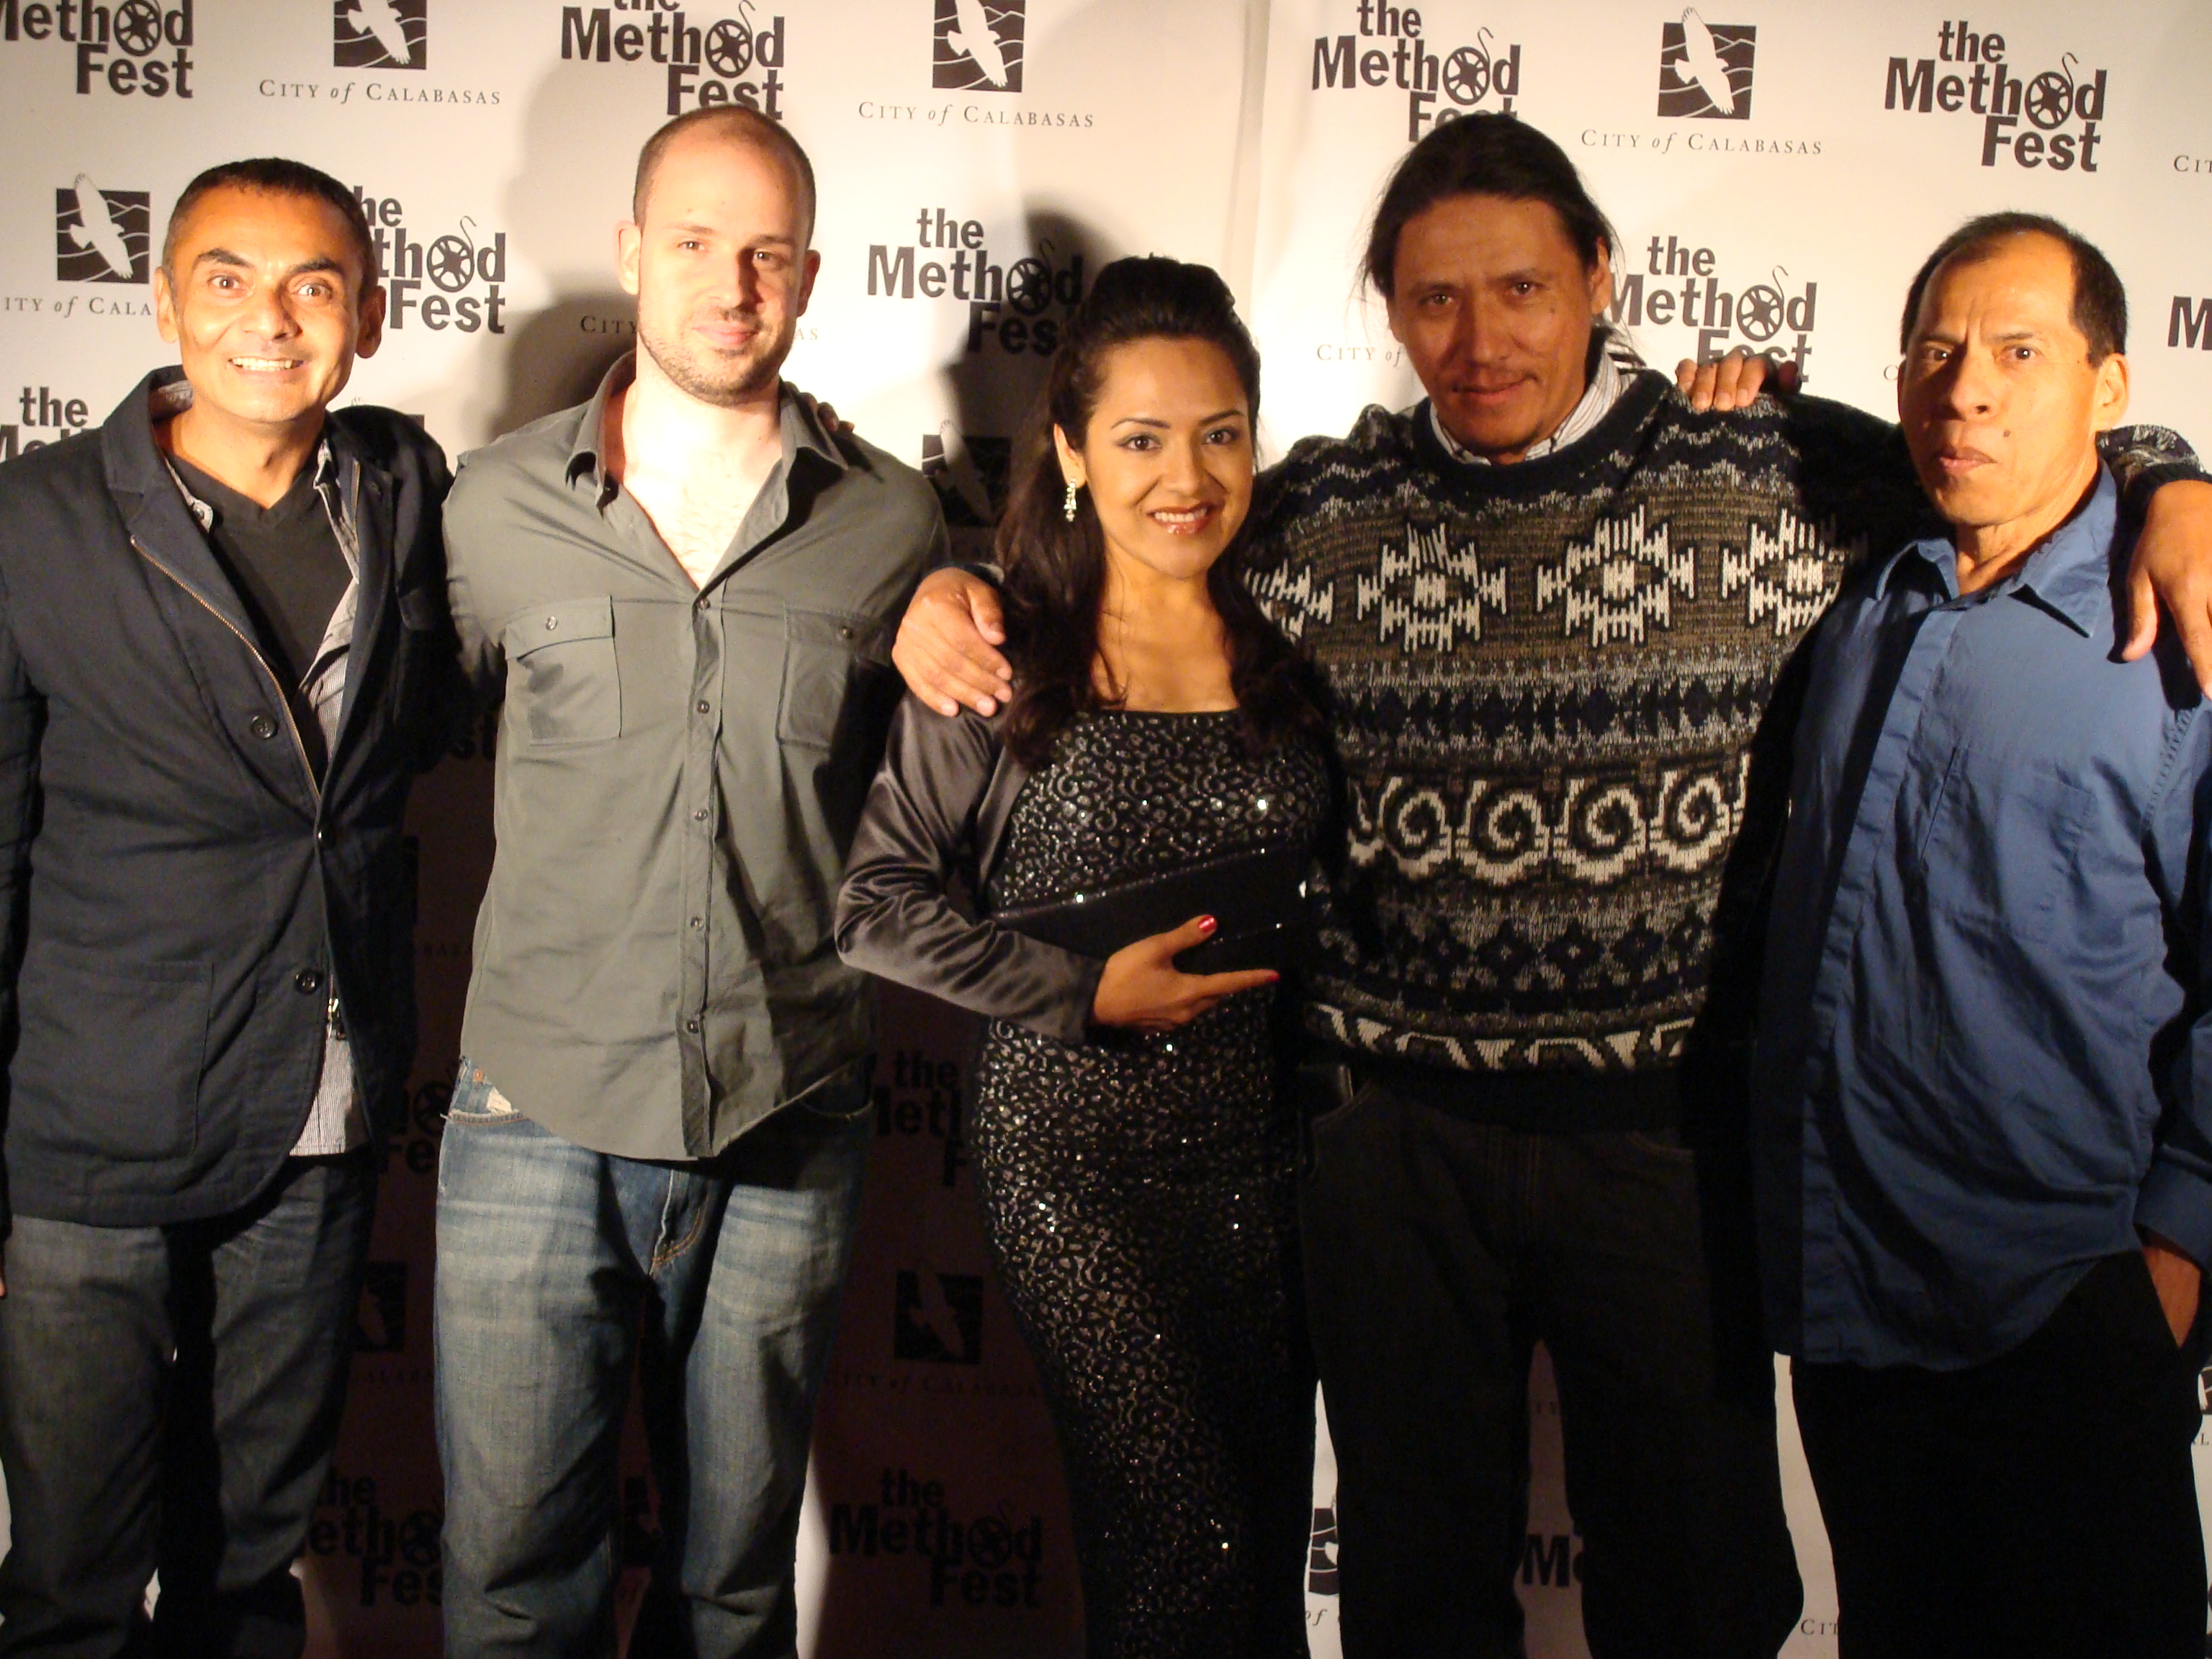 Culebra Cast and director at The Method Festival 2010